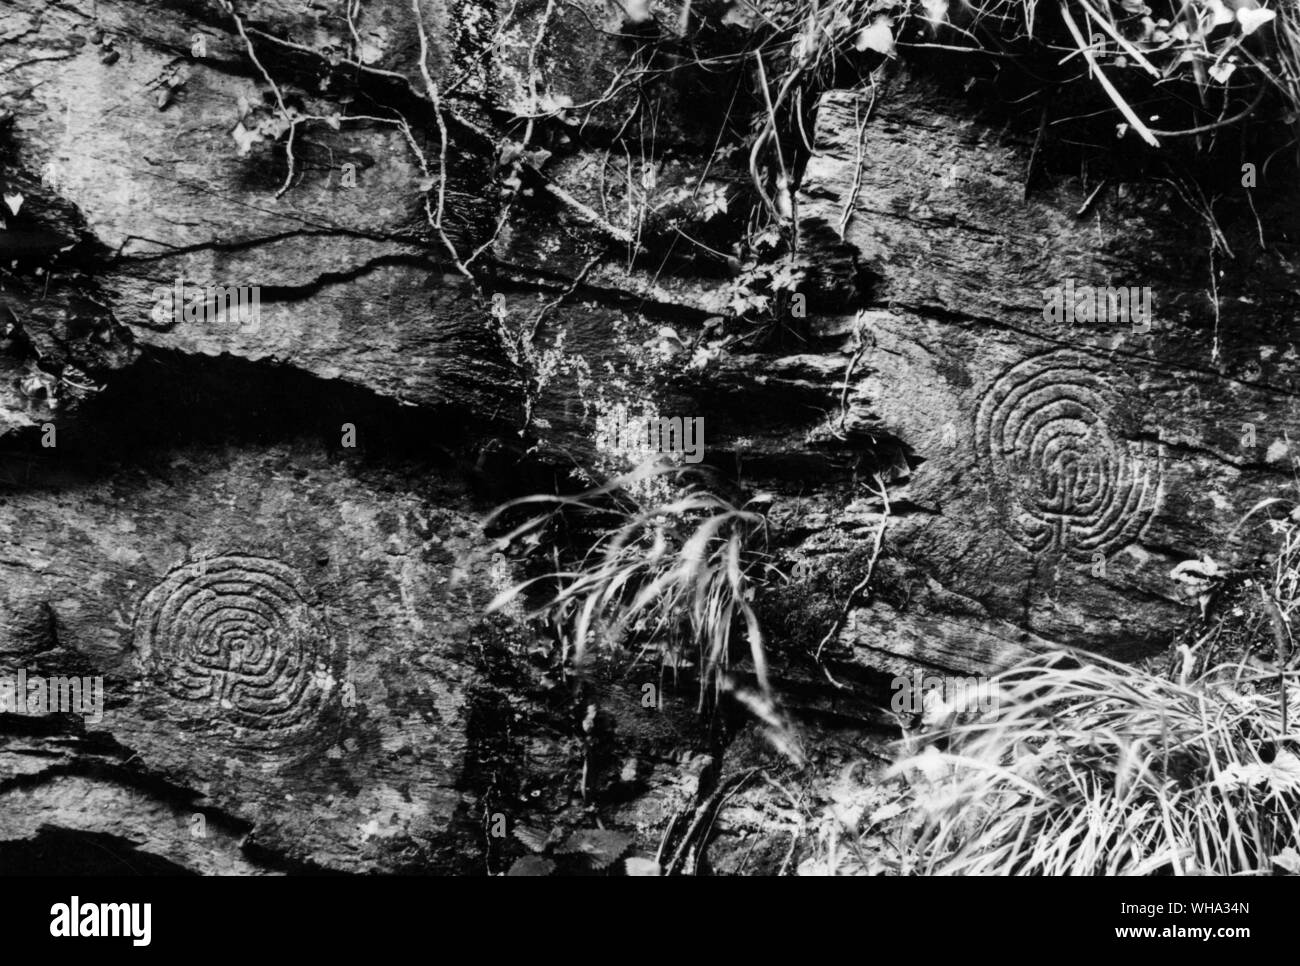 Early man: Mazes carved in rock, Rochy Valley, Cornwall. Stock Photo